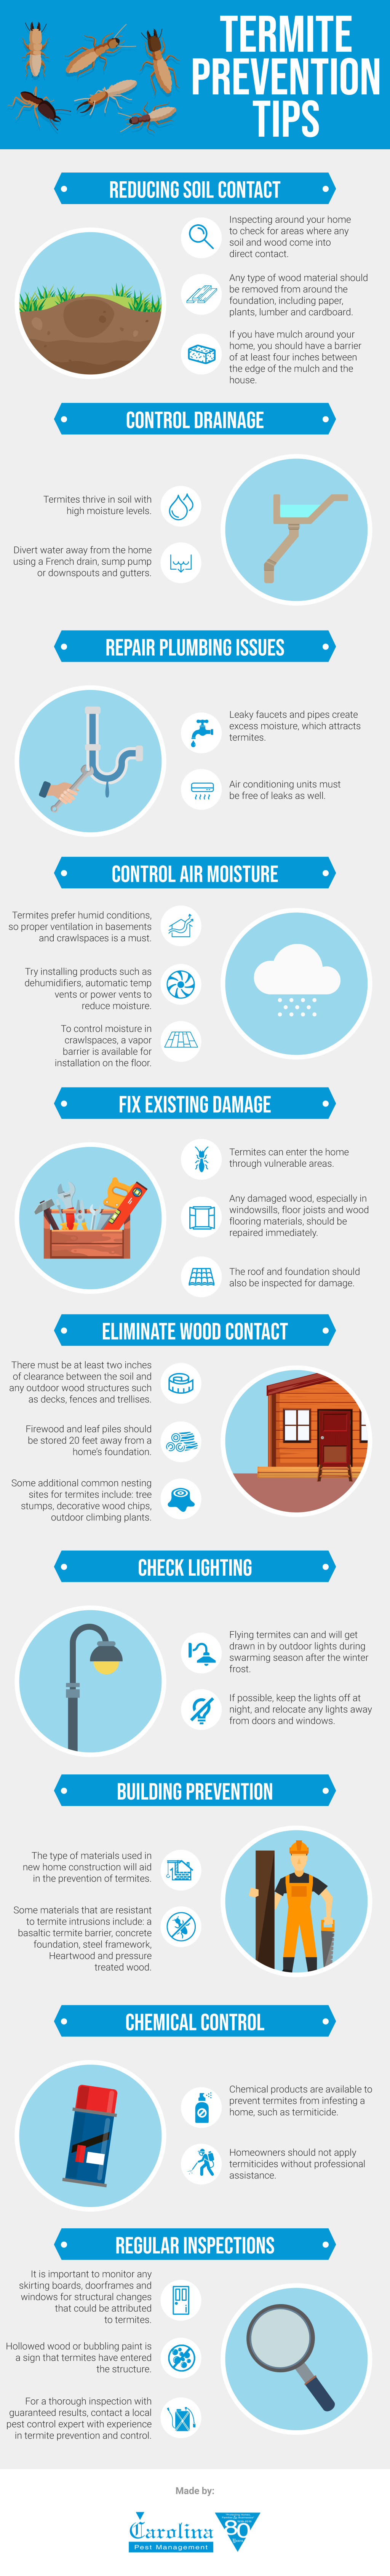 Termite Prevention Tips and Recommendations Infographic | Carolina Pest Control Management